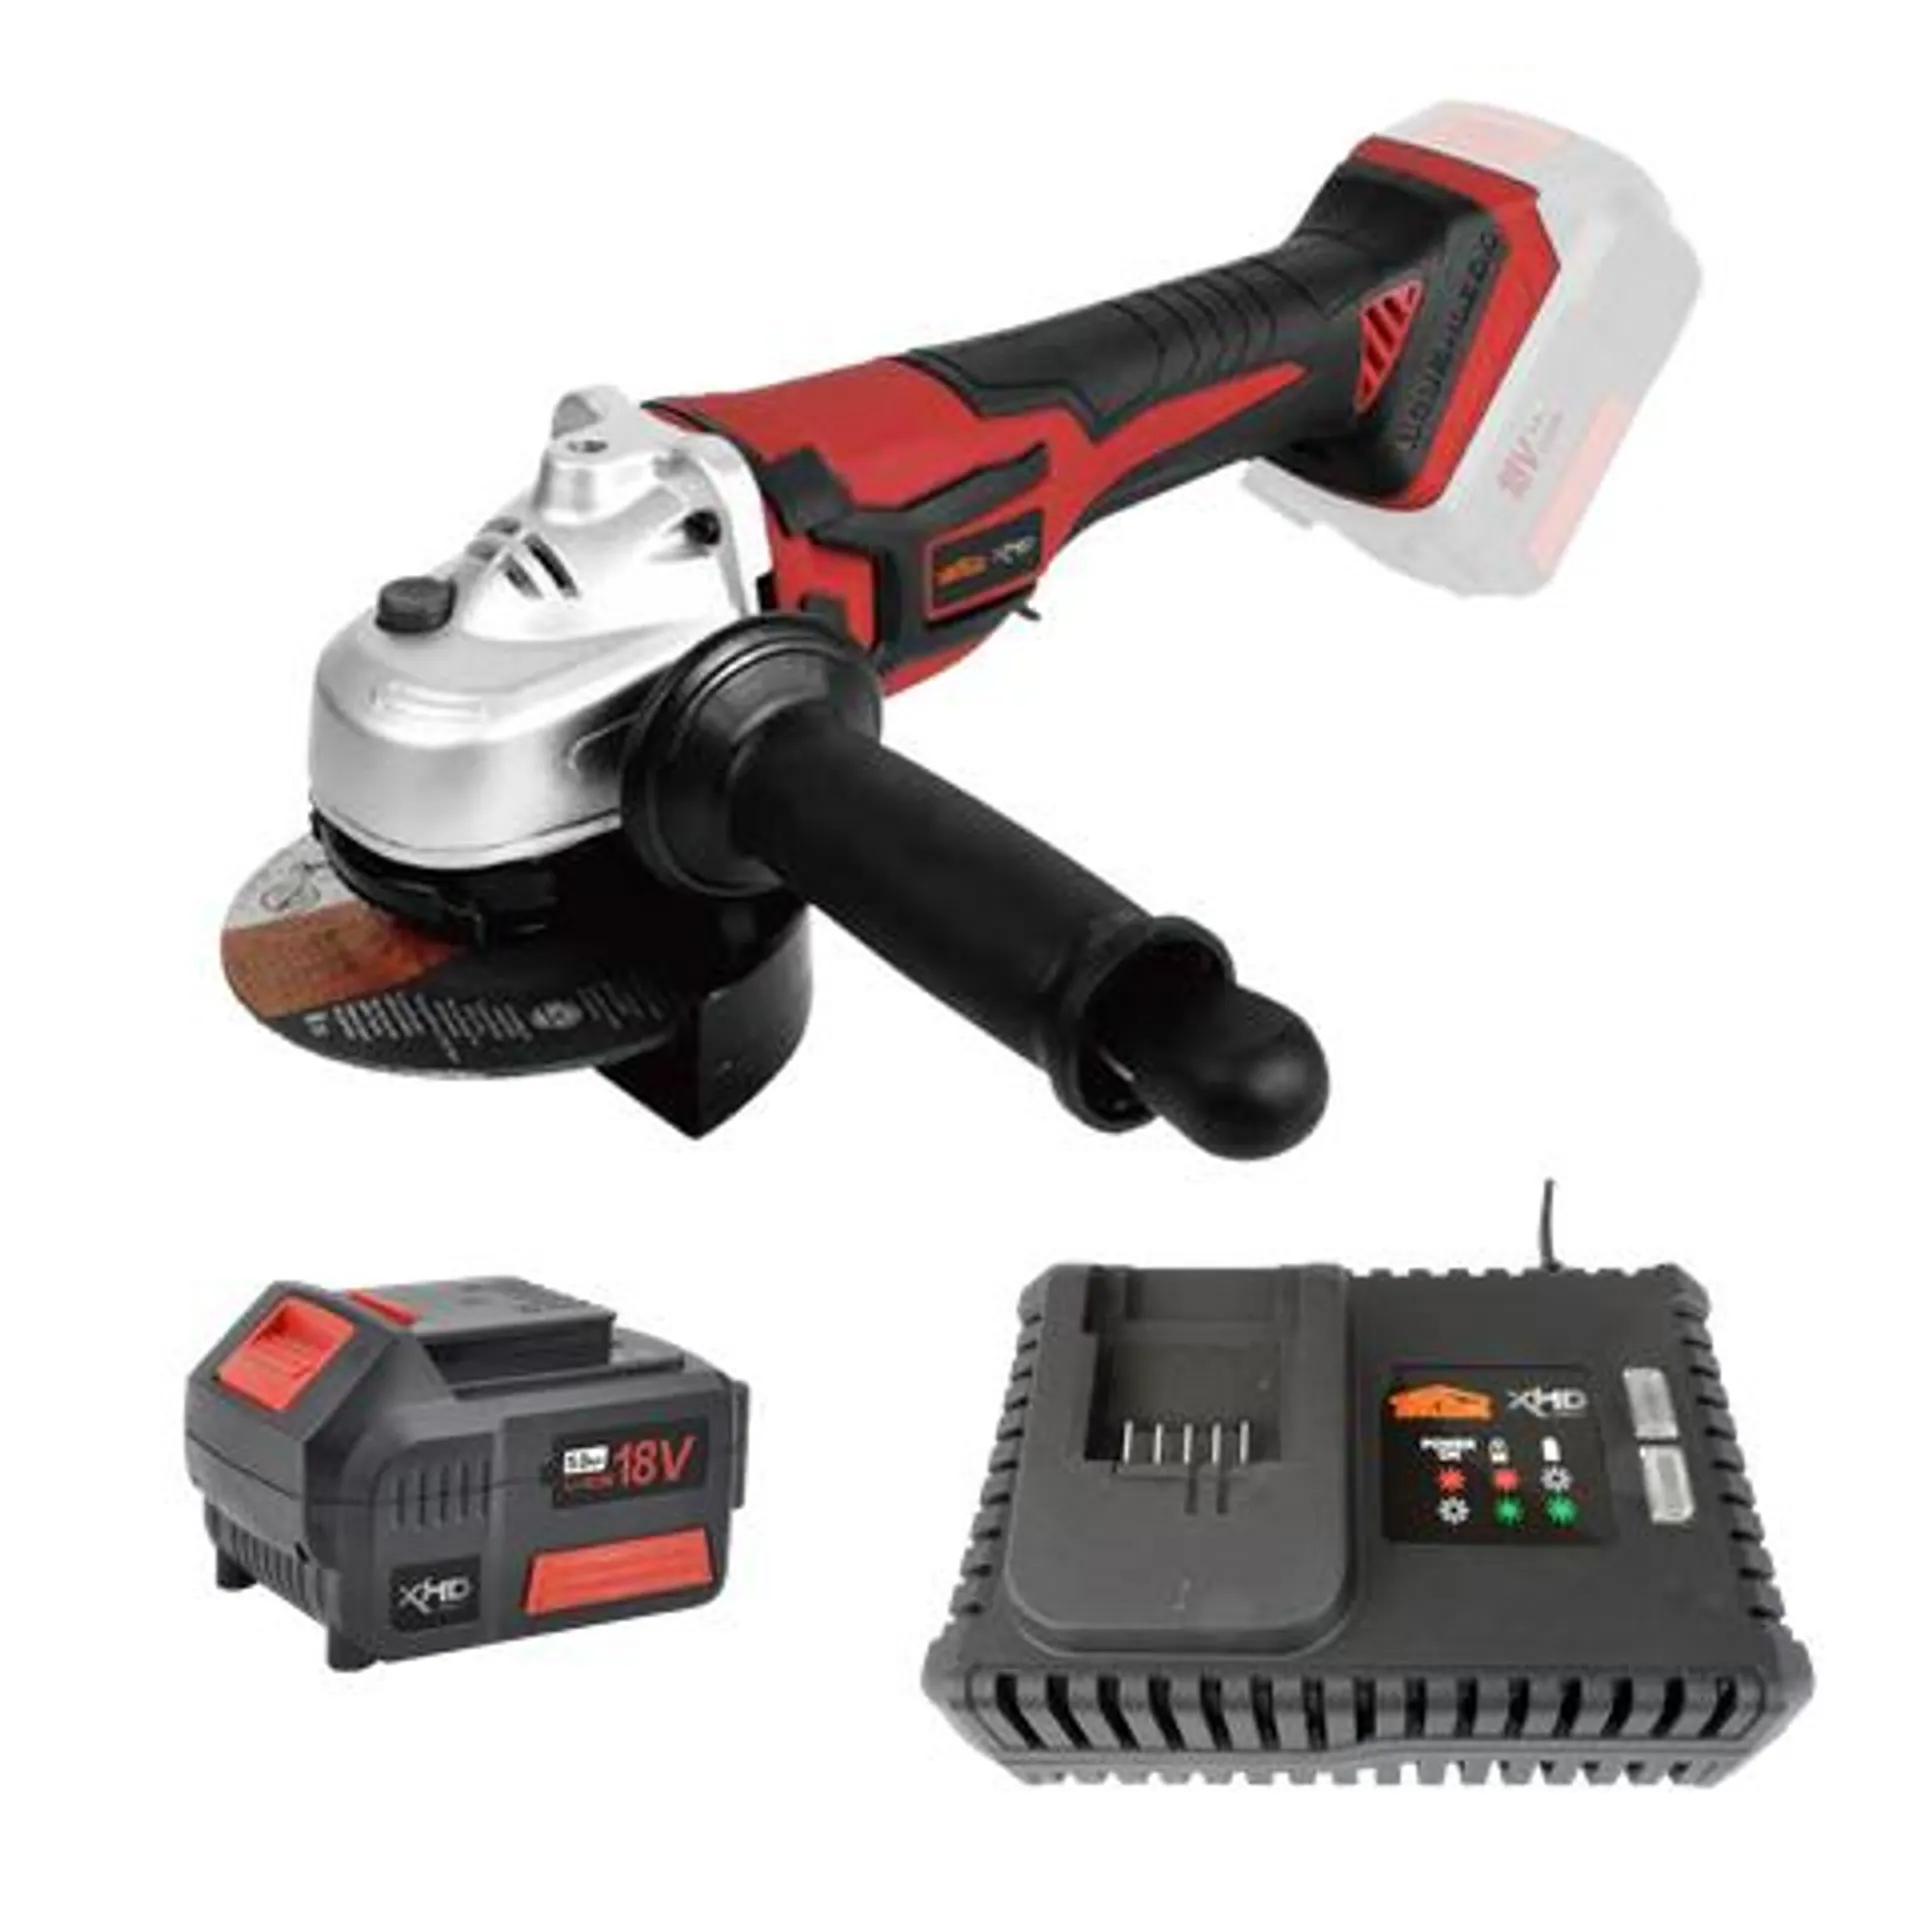 ToolShed XHD Cordless Angle Grinder Brushless 115mm 18V 5Ah